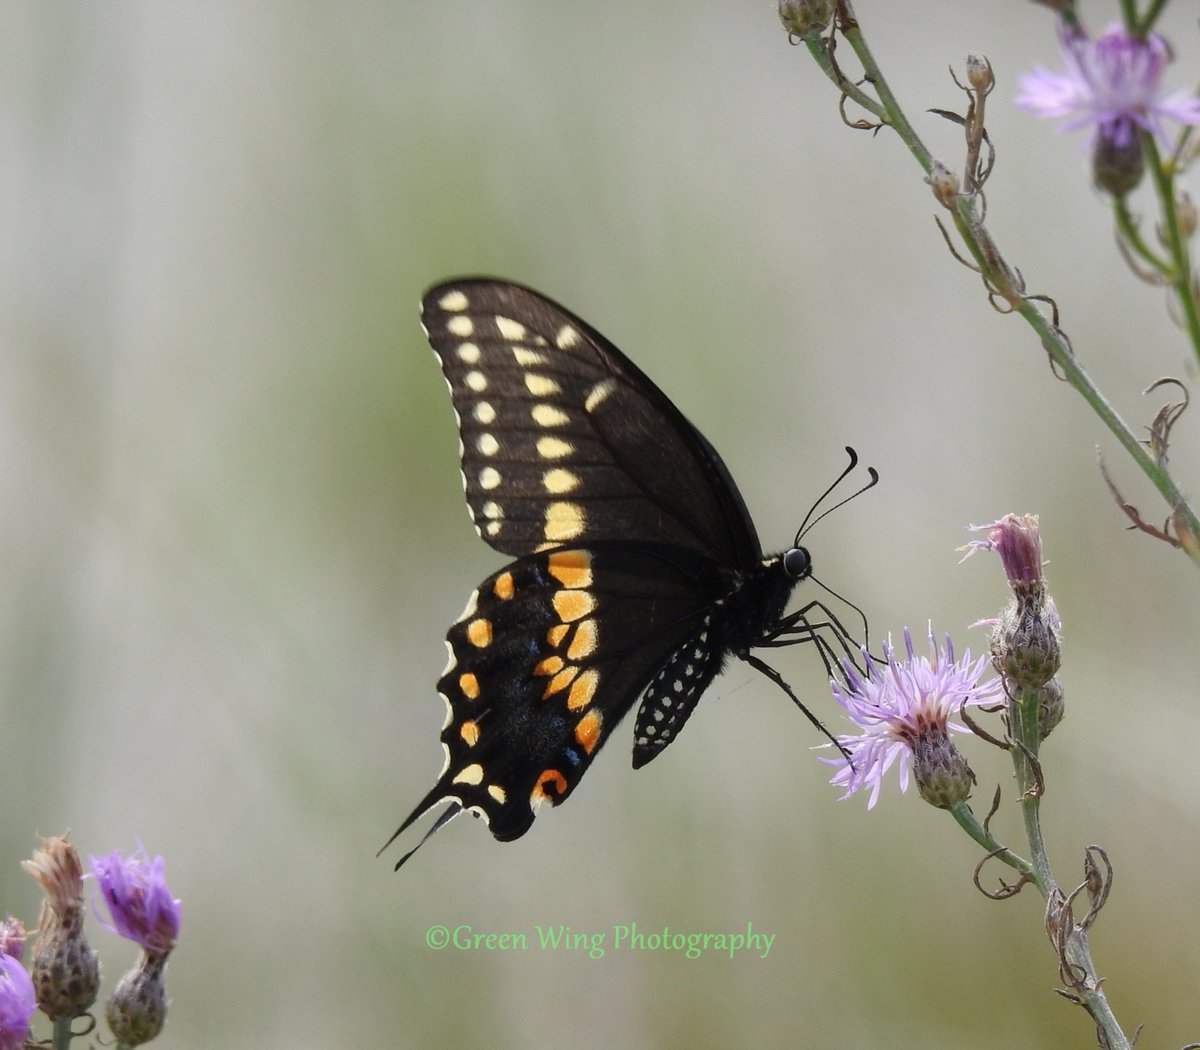 Swallowtail butterfly at Jones Beach this morning. #butterfly #swallowtail #nature #naturephotography #longislandnature #longisland #longislandny #jonesbeach